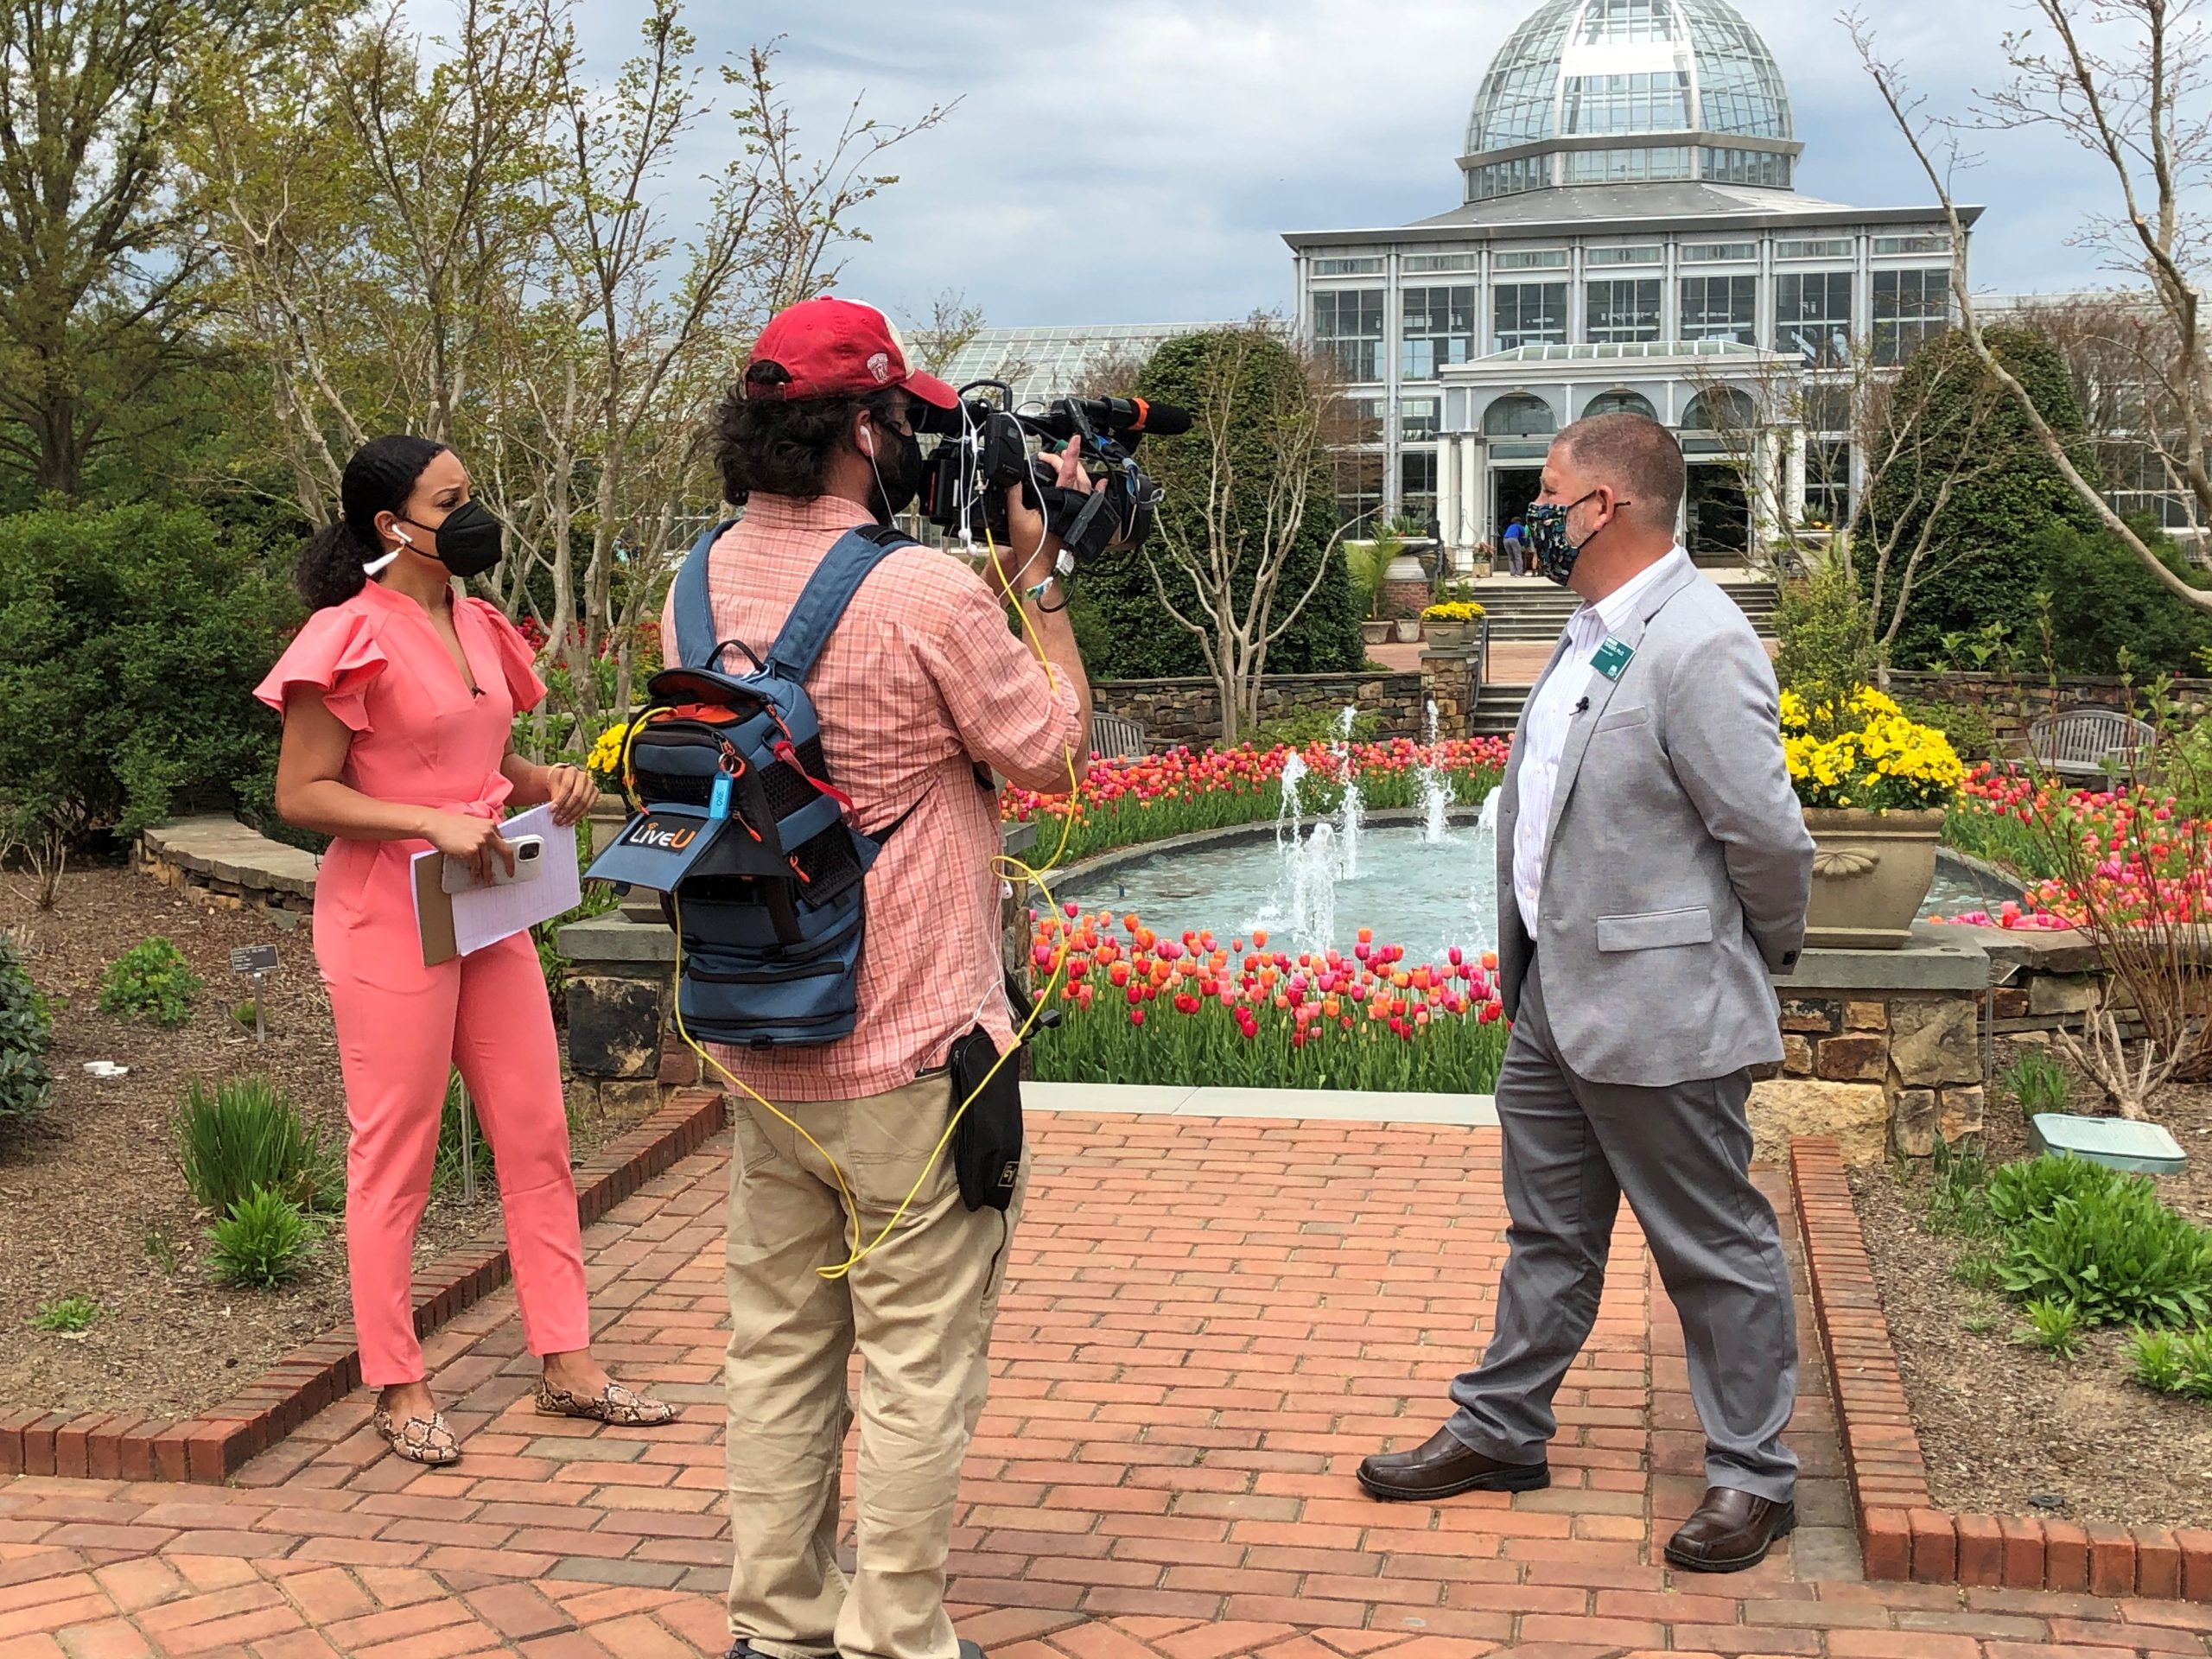 Looking back at 2021, in spring Ch. 12 Reporter Candice Smith interviewed Garden President and CEO Brian Trader